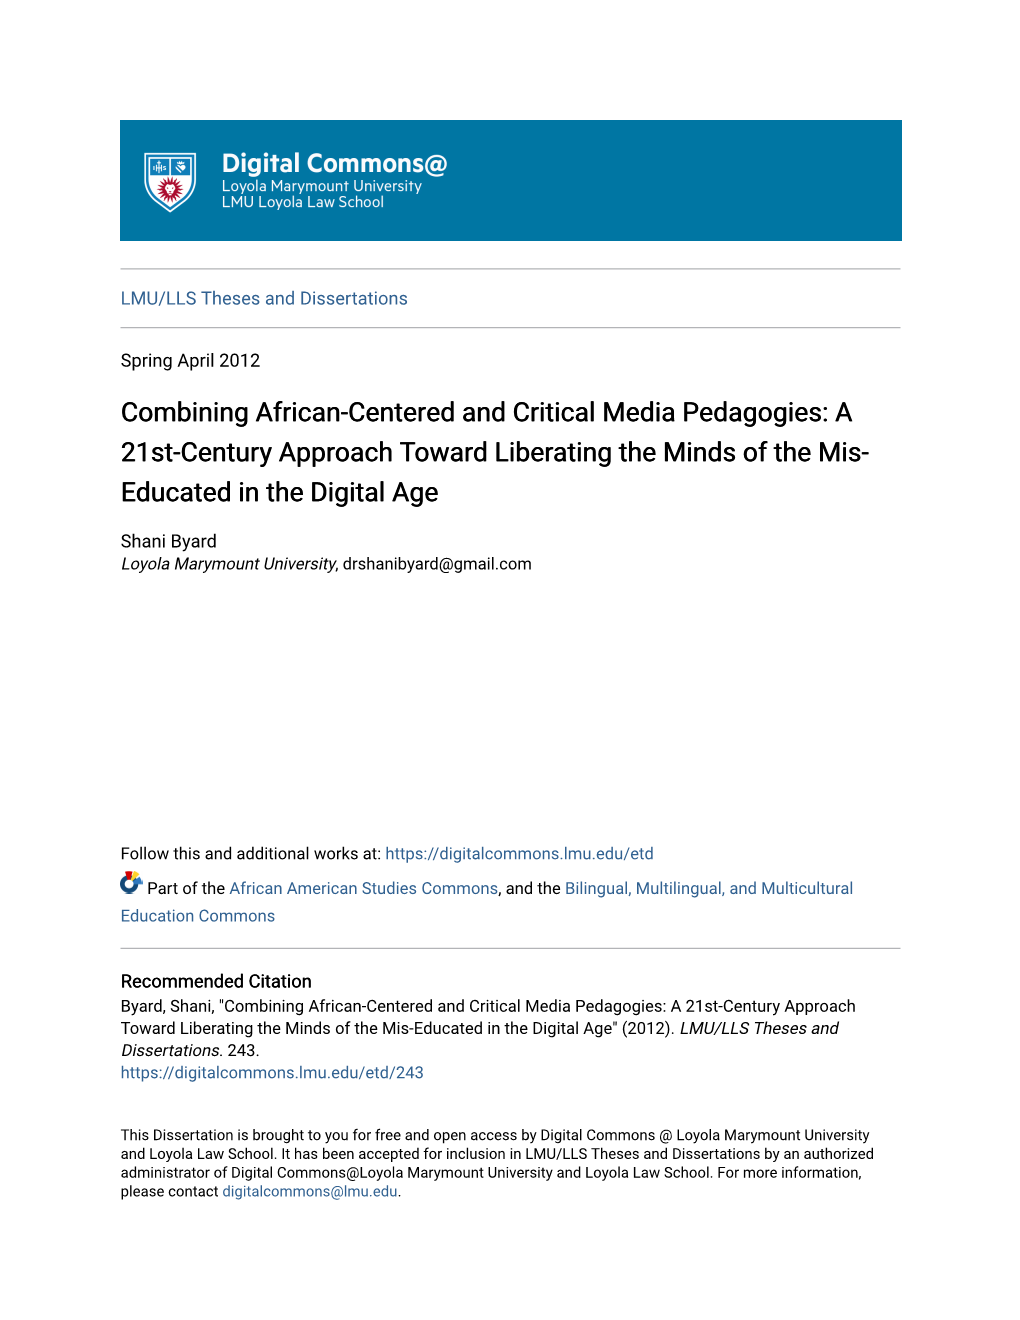 Combining African-Centered and Critical Media Pedagogies: a 21St-Century Approach Toward Liberating the Minds of the Mis- Educated in the Digital Age